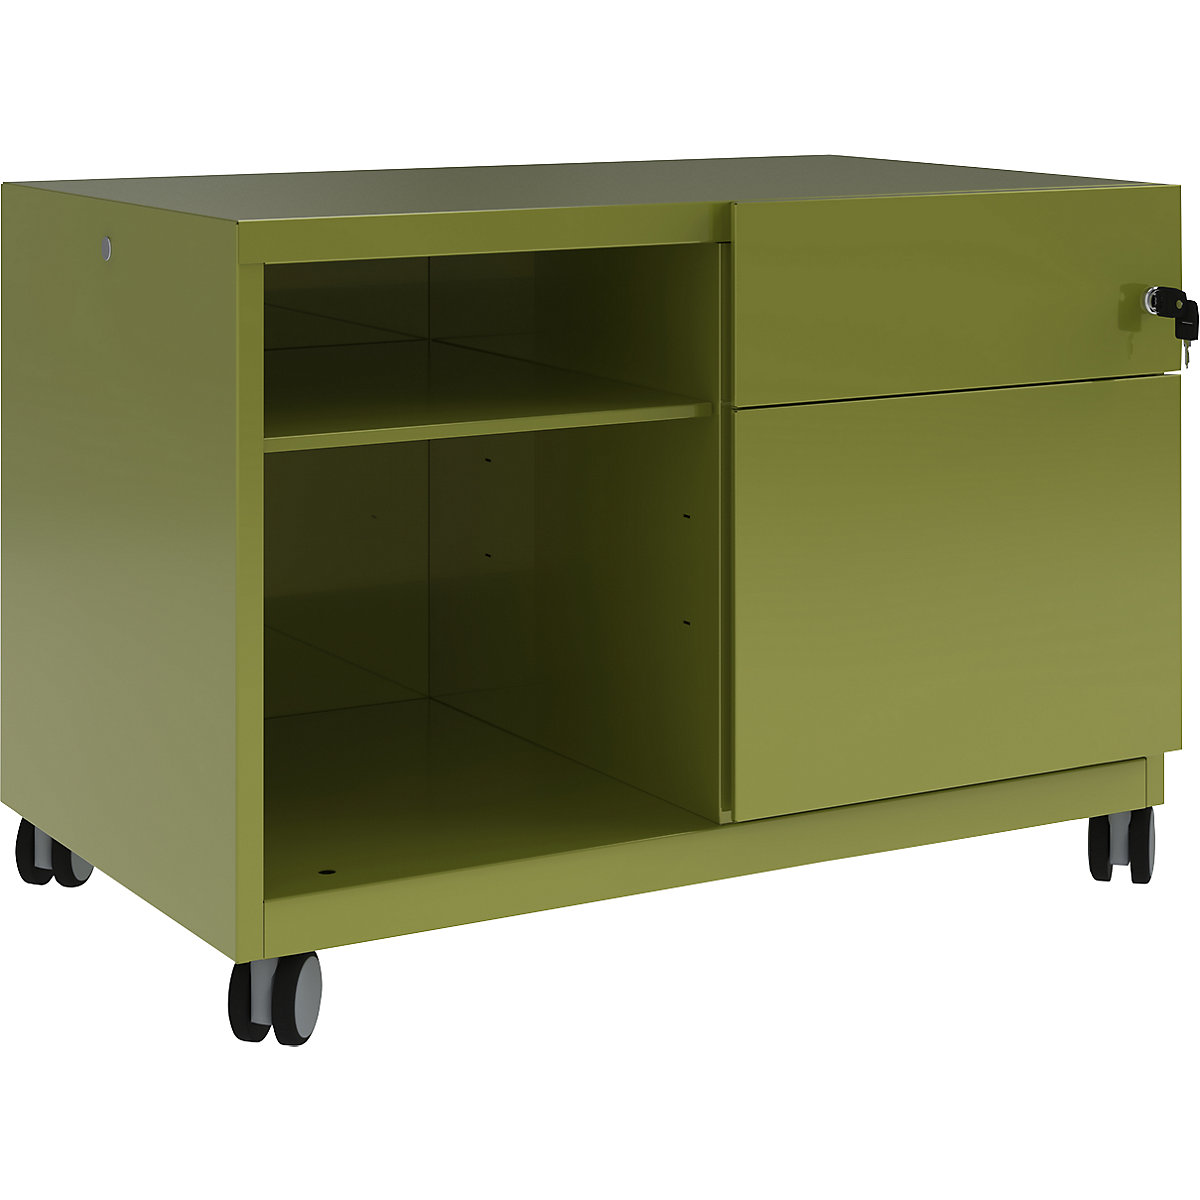 Note™ CADDY, HxBxT 563 x 800 x 490 mm – BISLEY, 1 universal drawer and suspension file drawer on the right, green-10